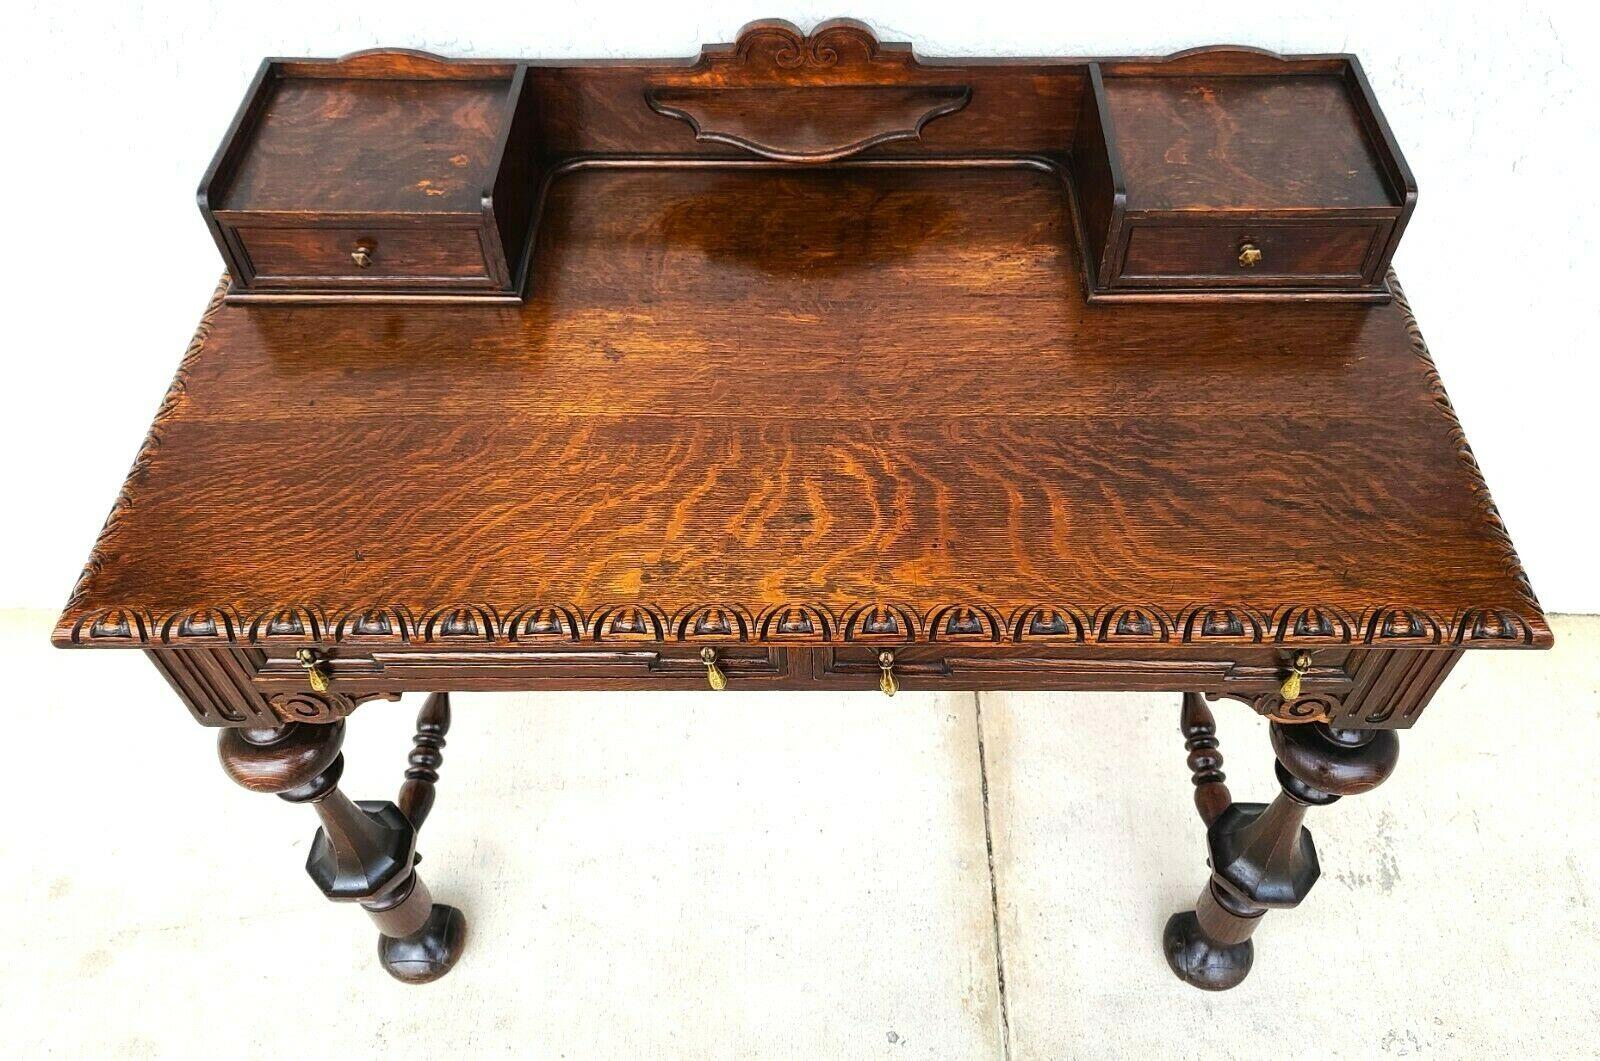 Offering one of our recent palm beach estate fine furniture acquisitions of an antique c 1900 writing desk by Klingmans with 2 drawers on top and 2 below.

Approximate measurements in inches
30